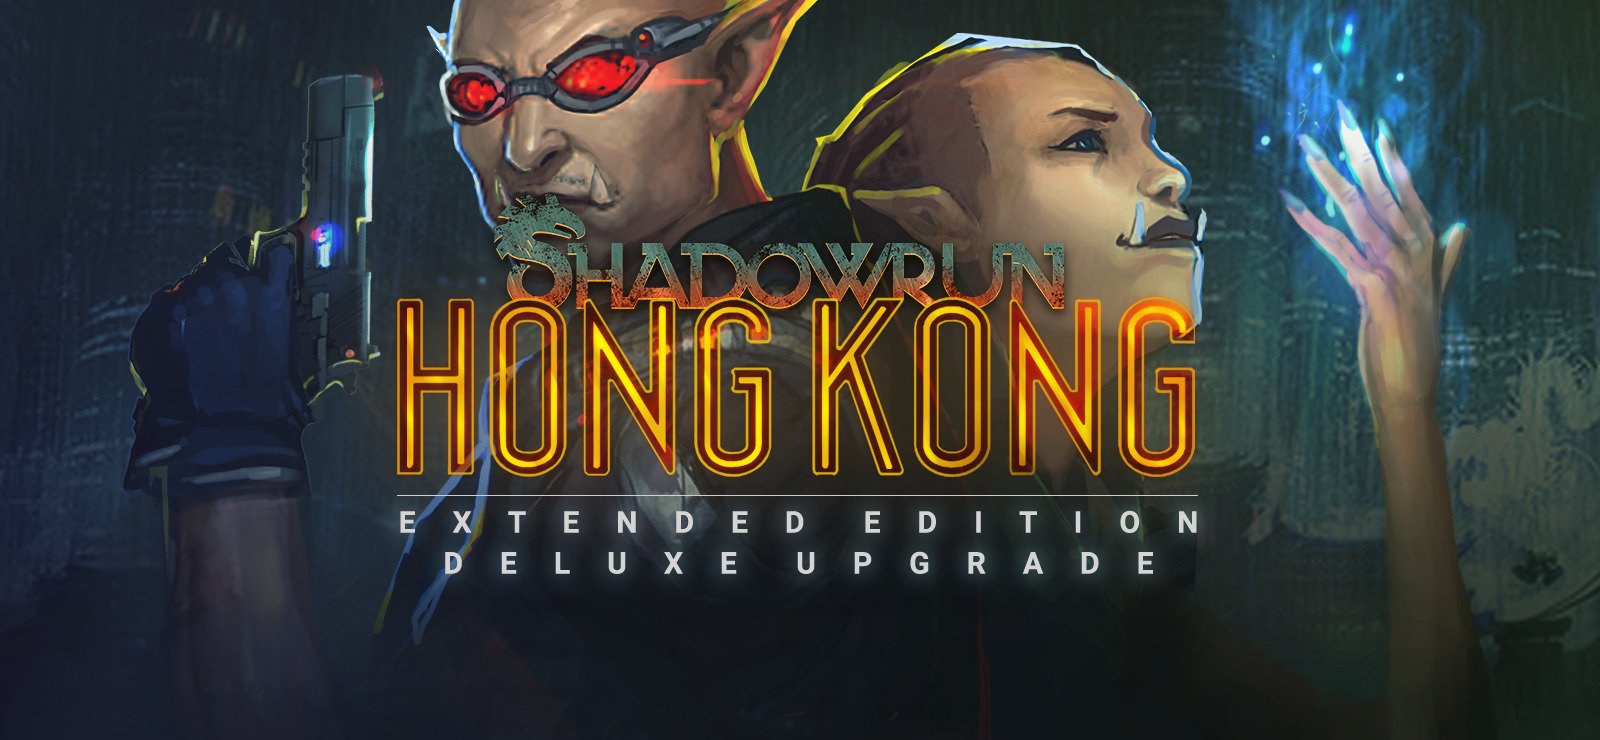 Shadowrun Hong Kong Extended Edition Deluxe Upgrade 6